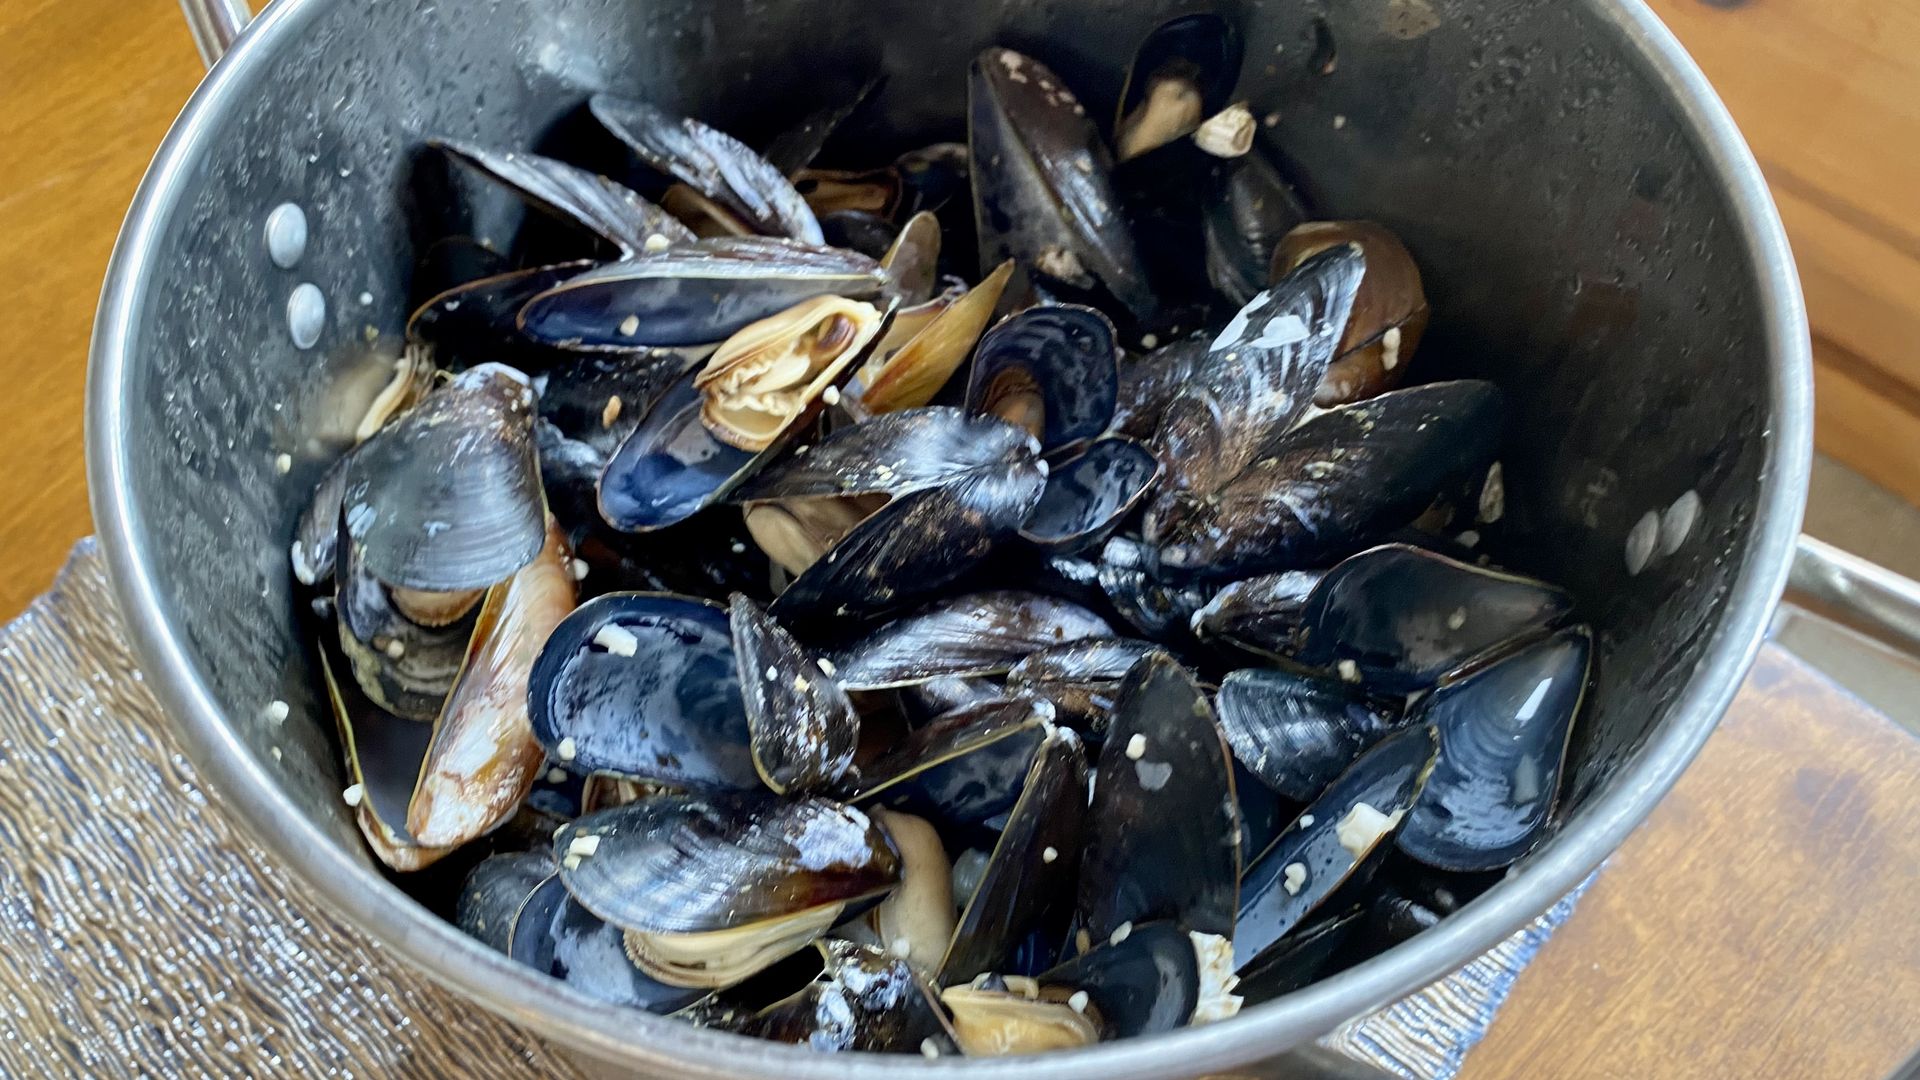 A stainless steel pot filled with mussels on a wooden table with a silver table runner. 